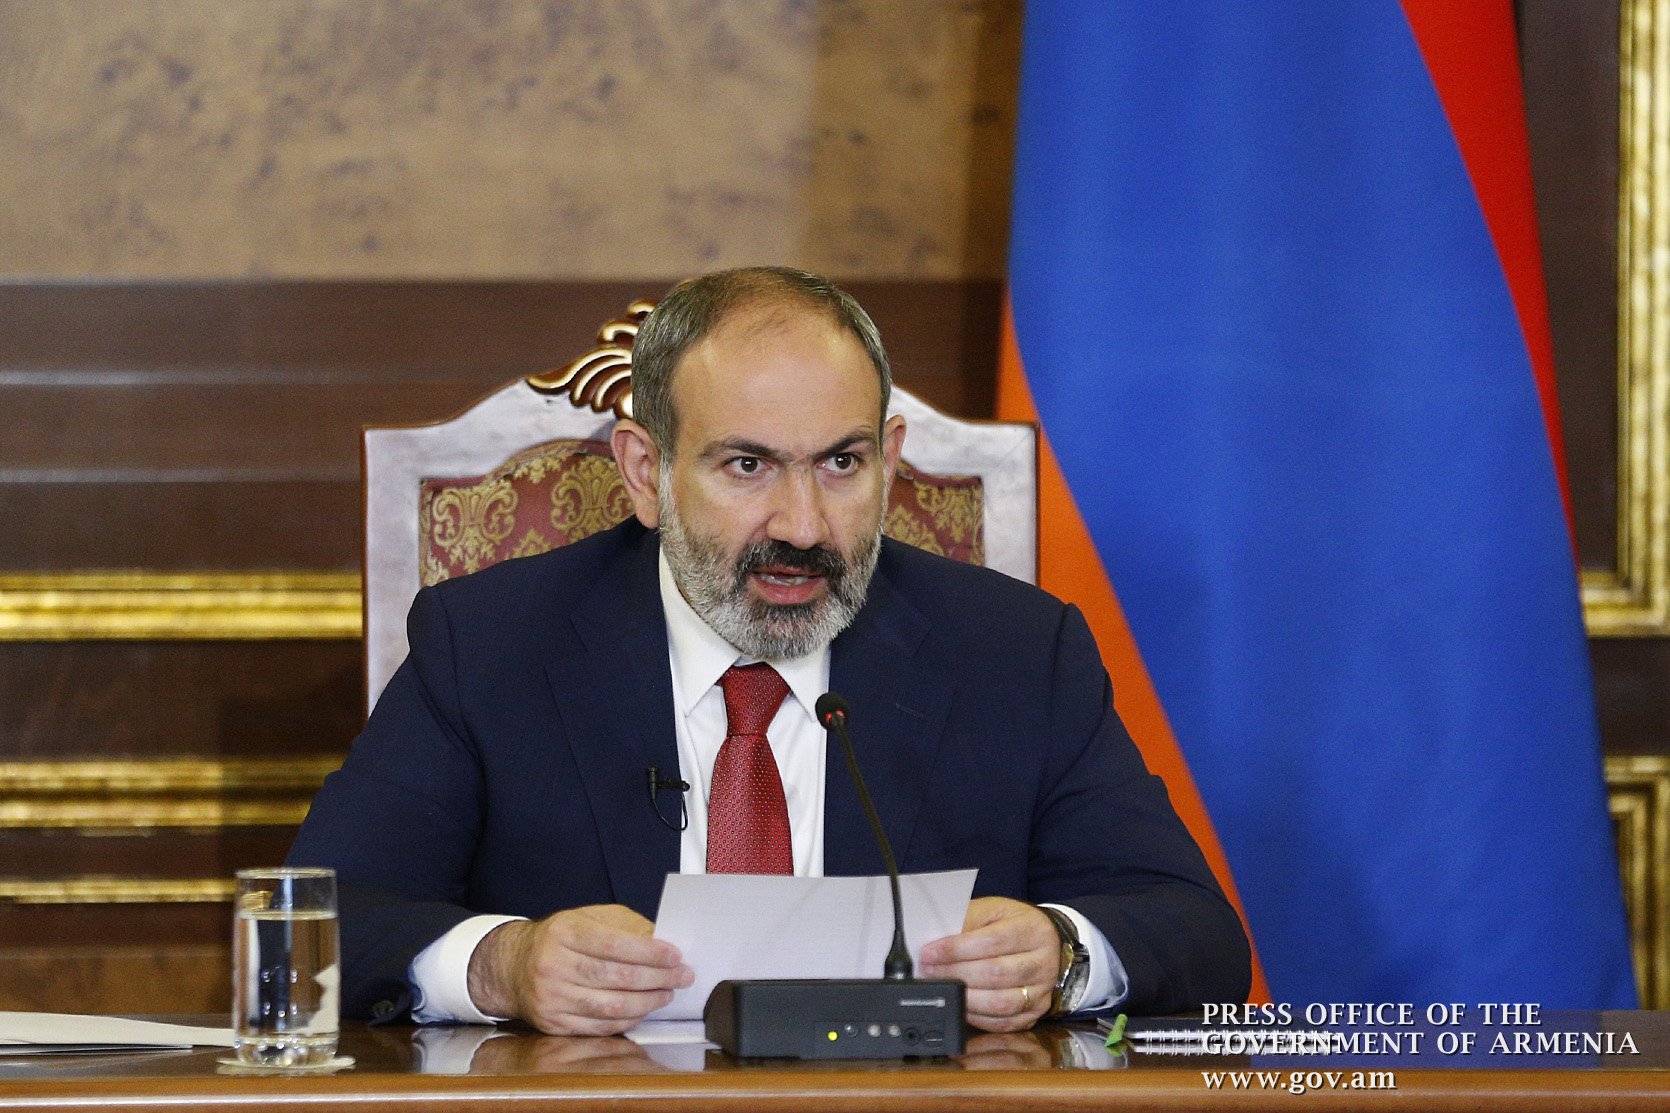 Nikol Pashinyan: All judges in Armenia should be subjected to vetting